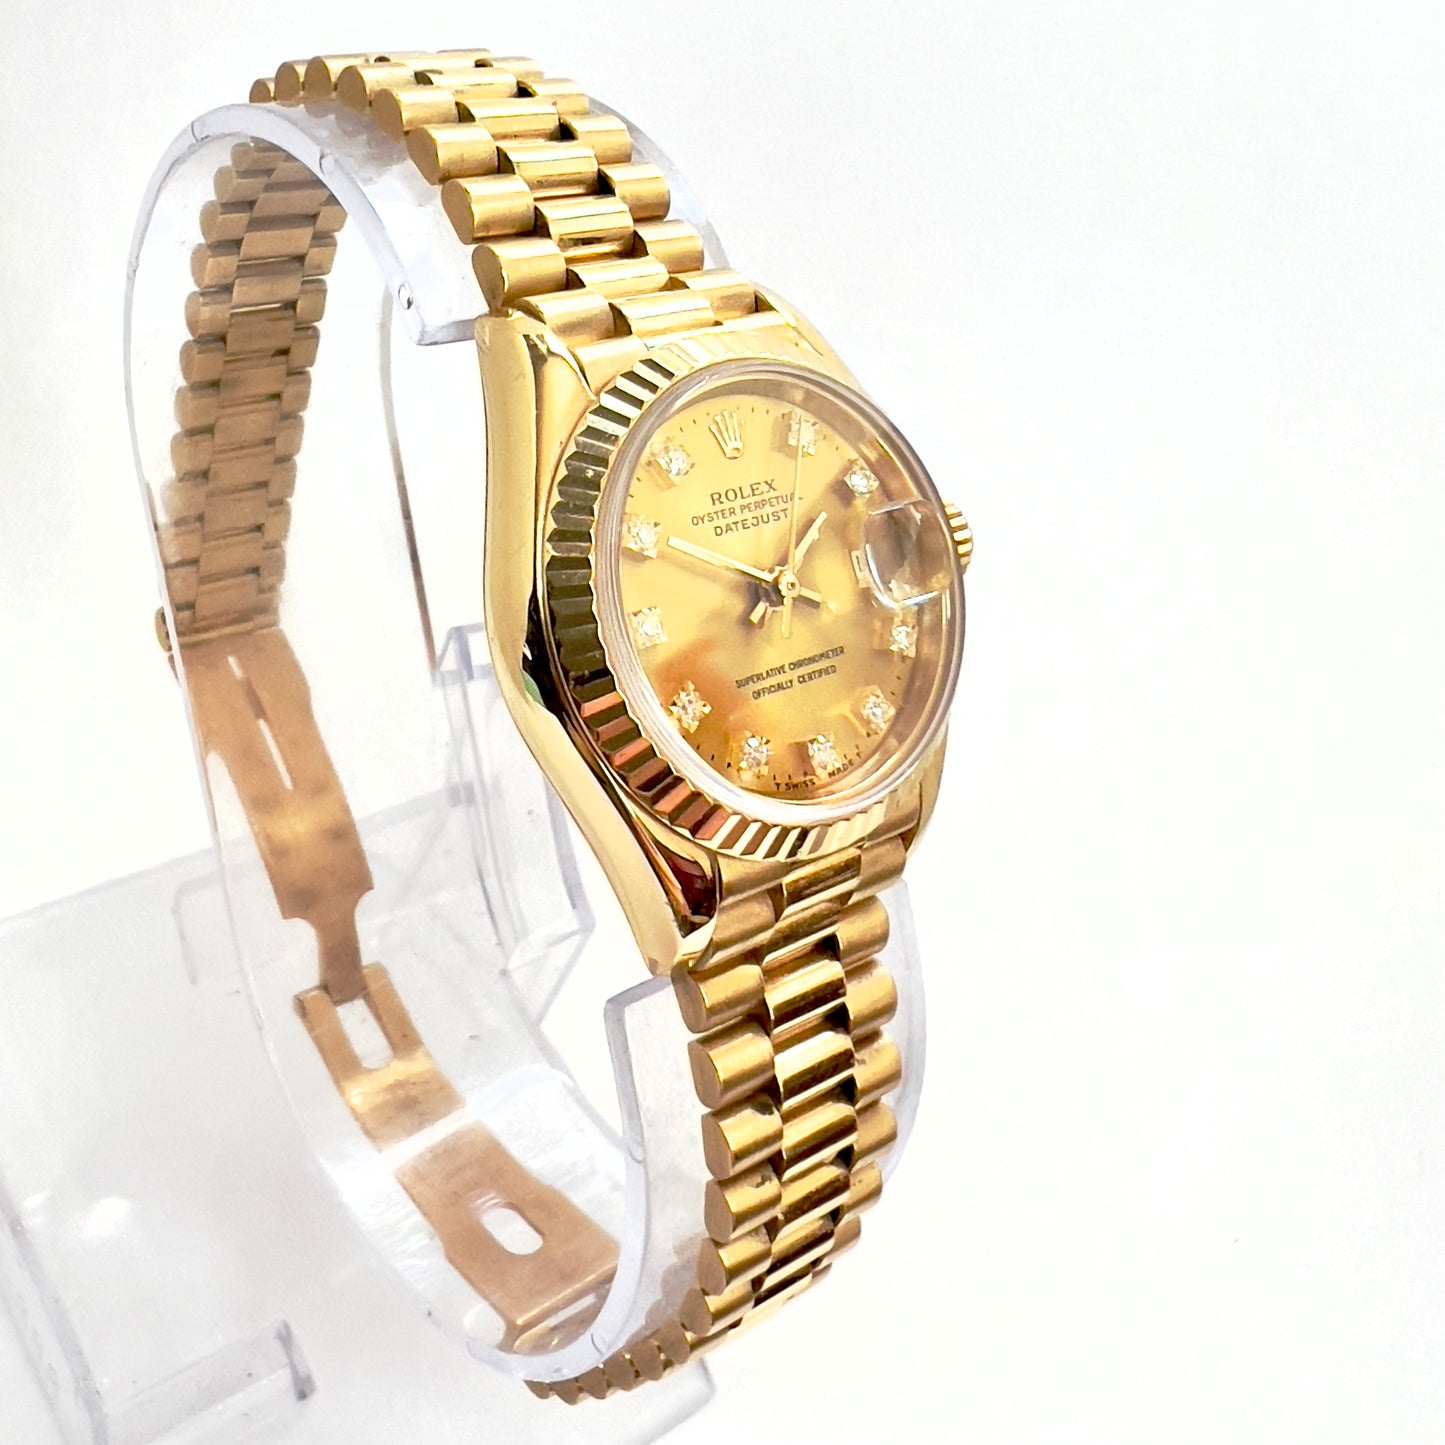 ROLEX OYSTER PERPETUAL DATEJUST Presidential 26mm 18K Yellow Gold FACTORY DIAMOND Watch